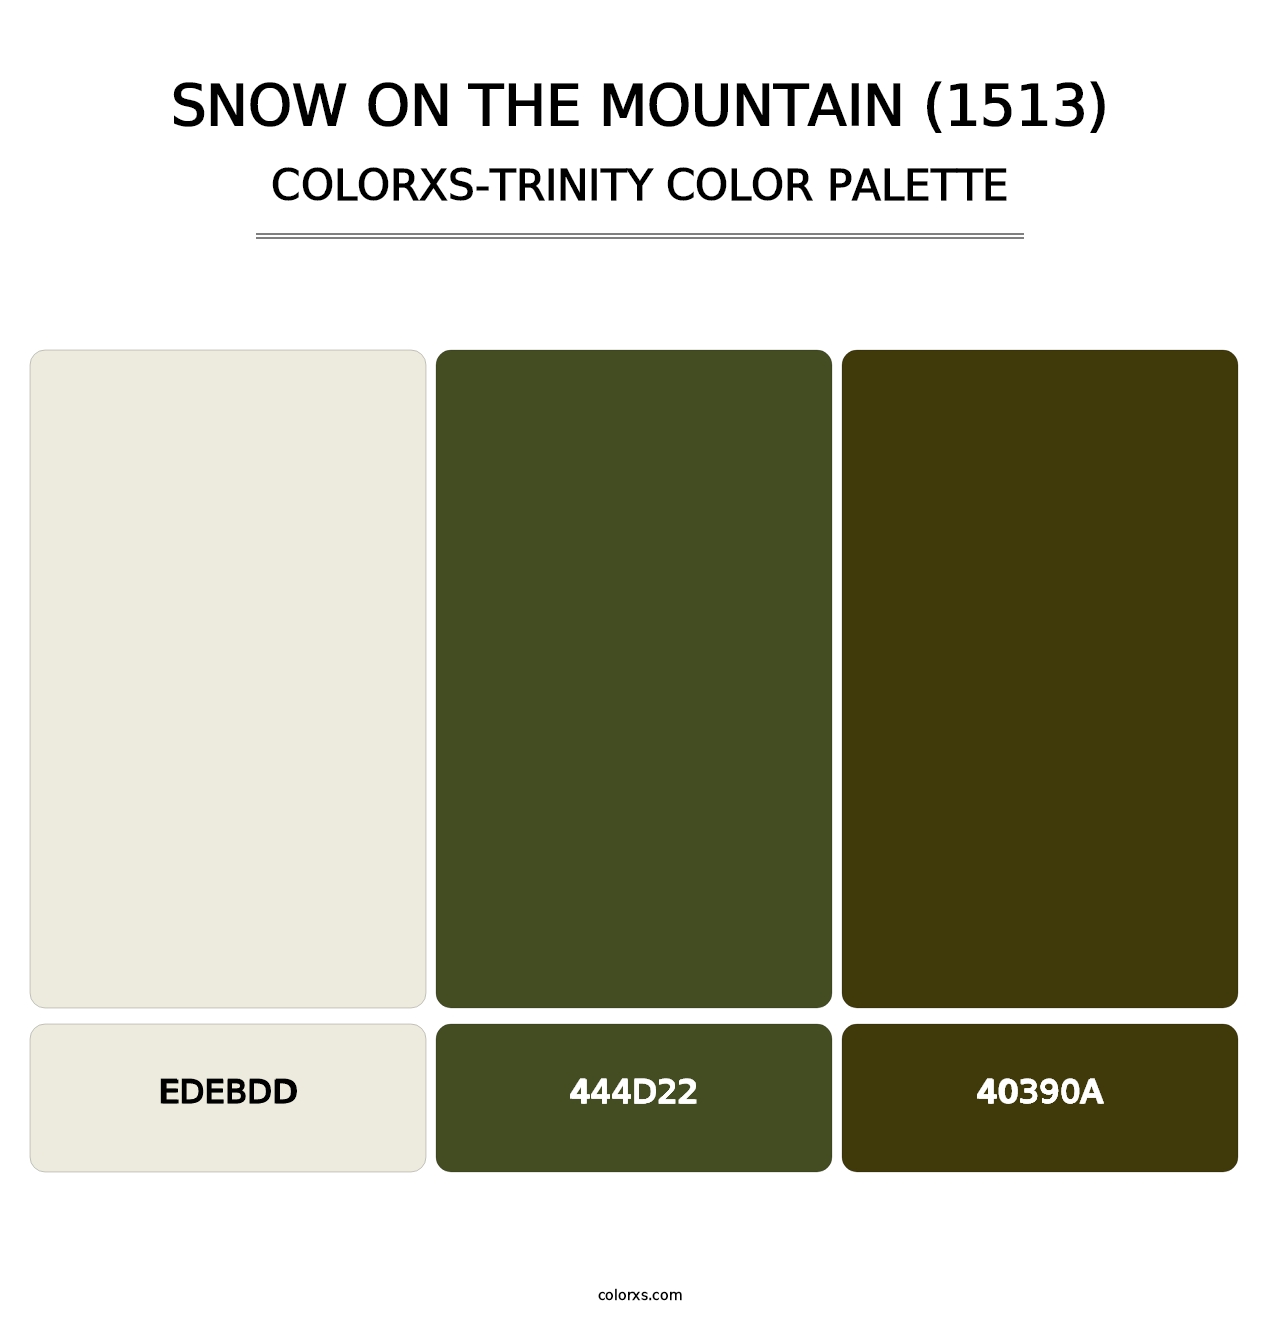 Snow on the Mountain (1513) - Colorxs Trinity Palette